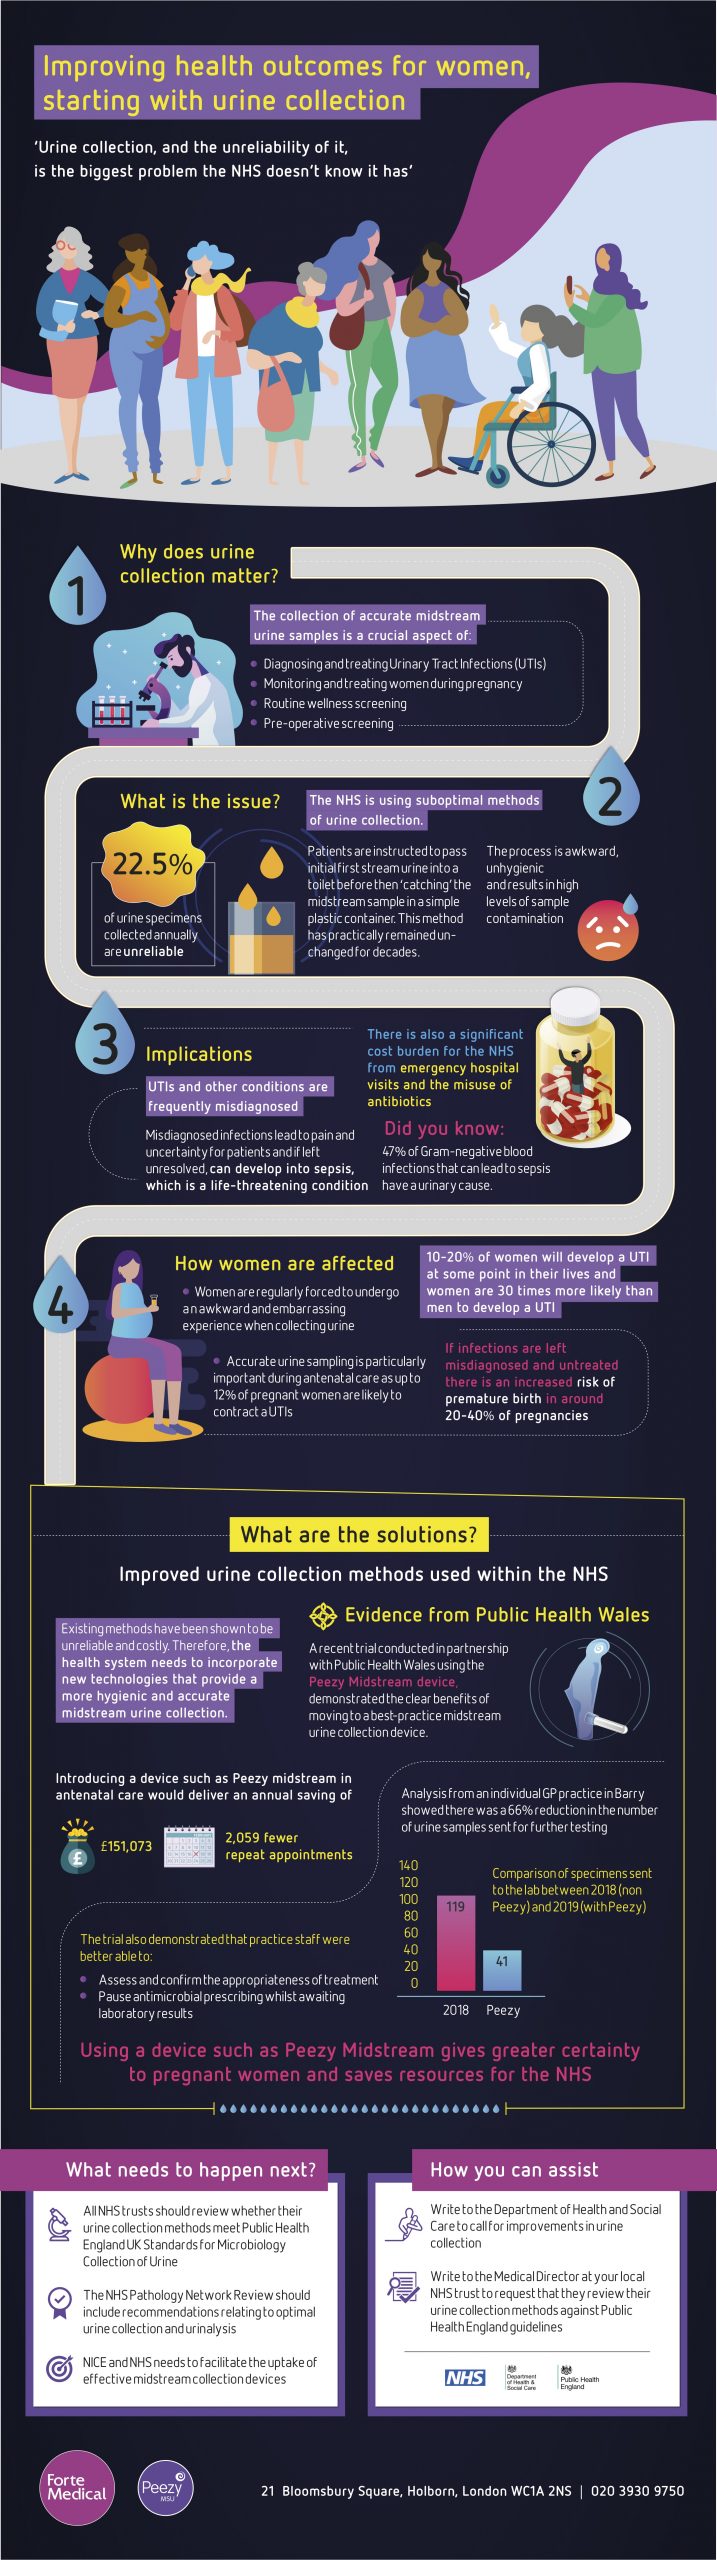 Improving health for women : urine collection